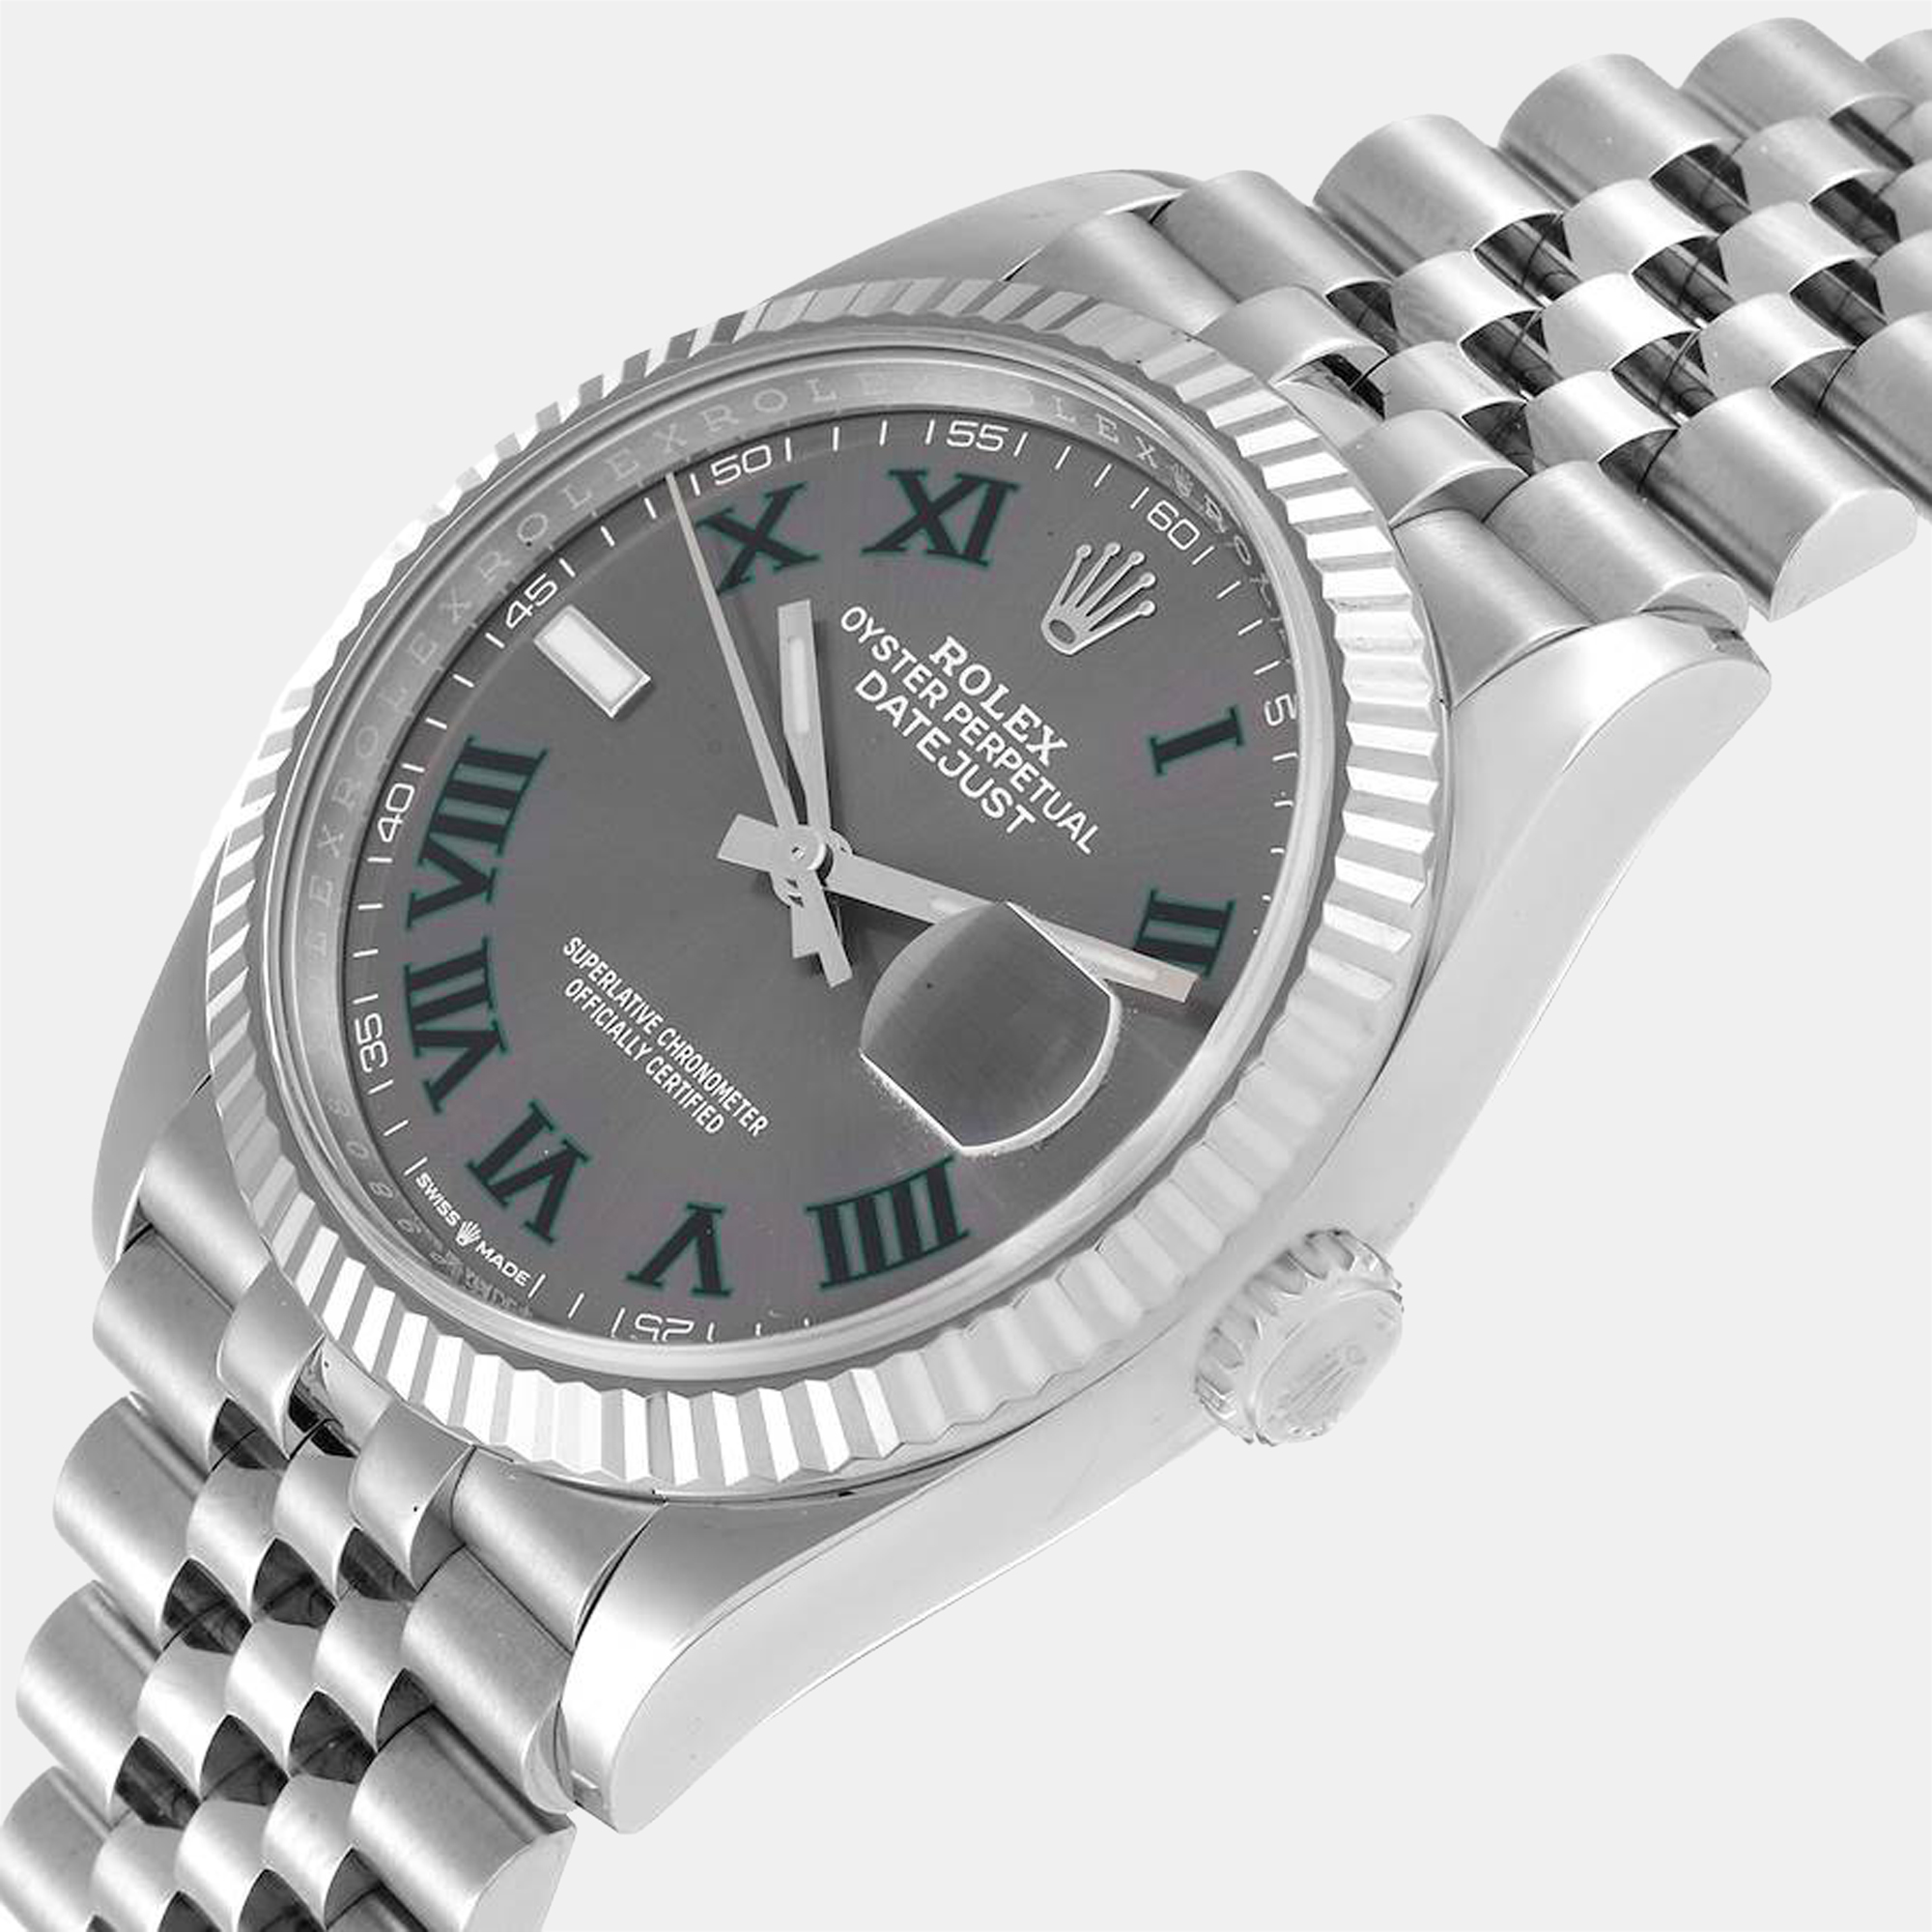 

Rolex Grey 18k White Gold And Stainless Steel Datejust Wimbledon 126234 Automatic Men's Wristwatch 36 mm